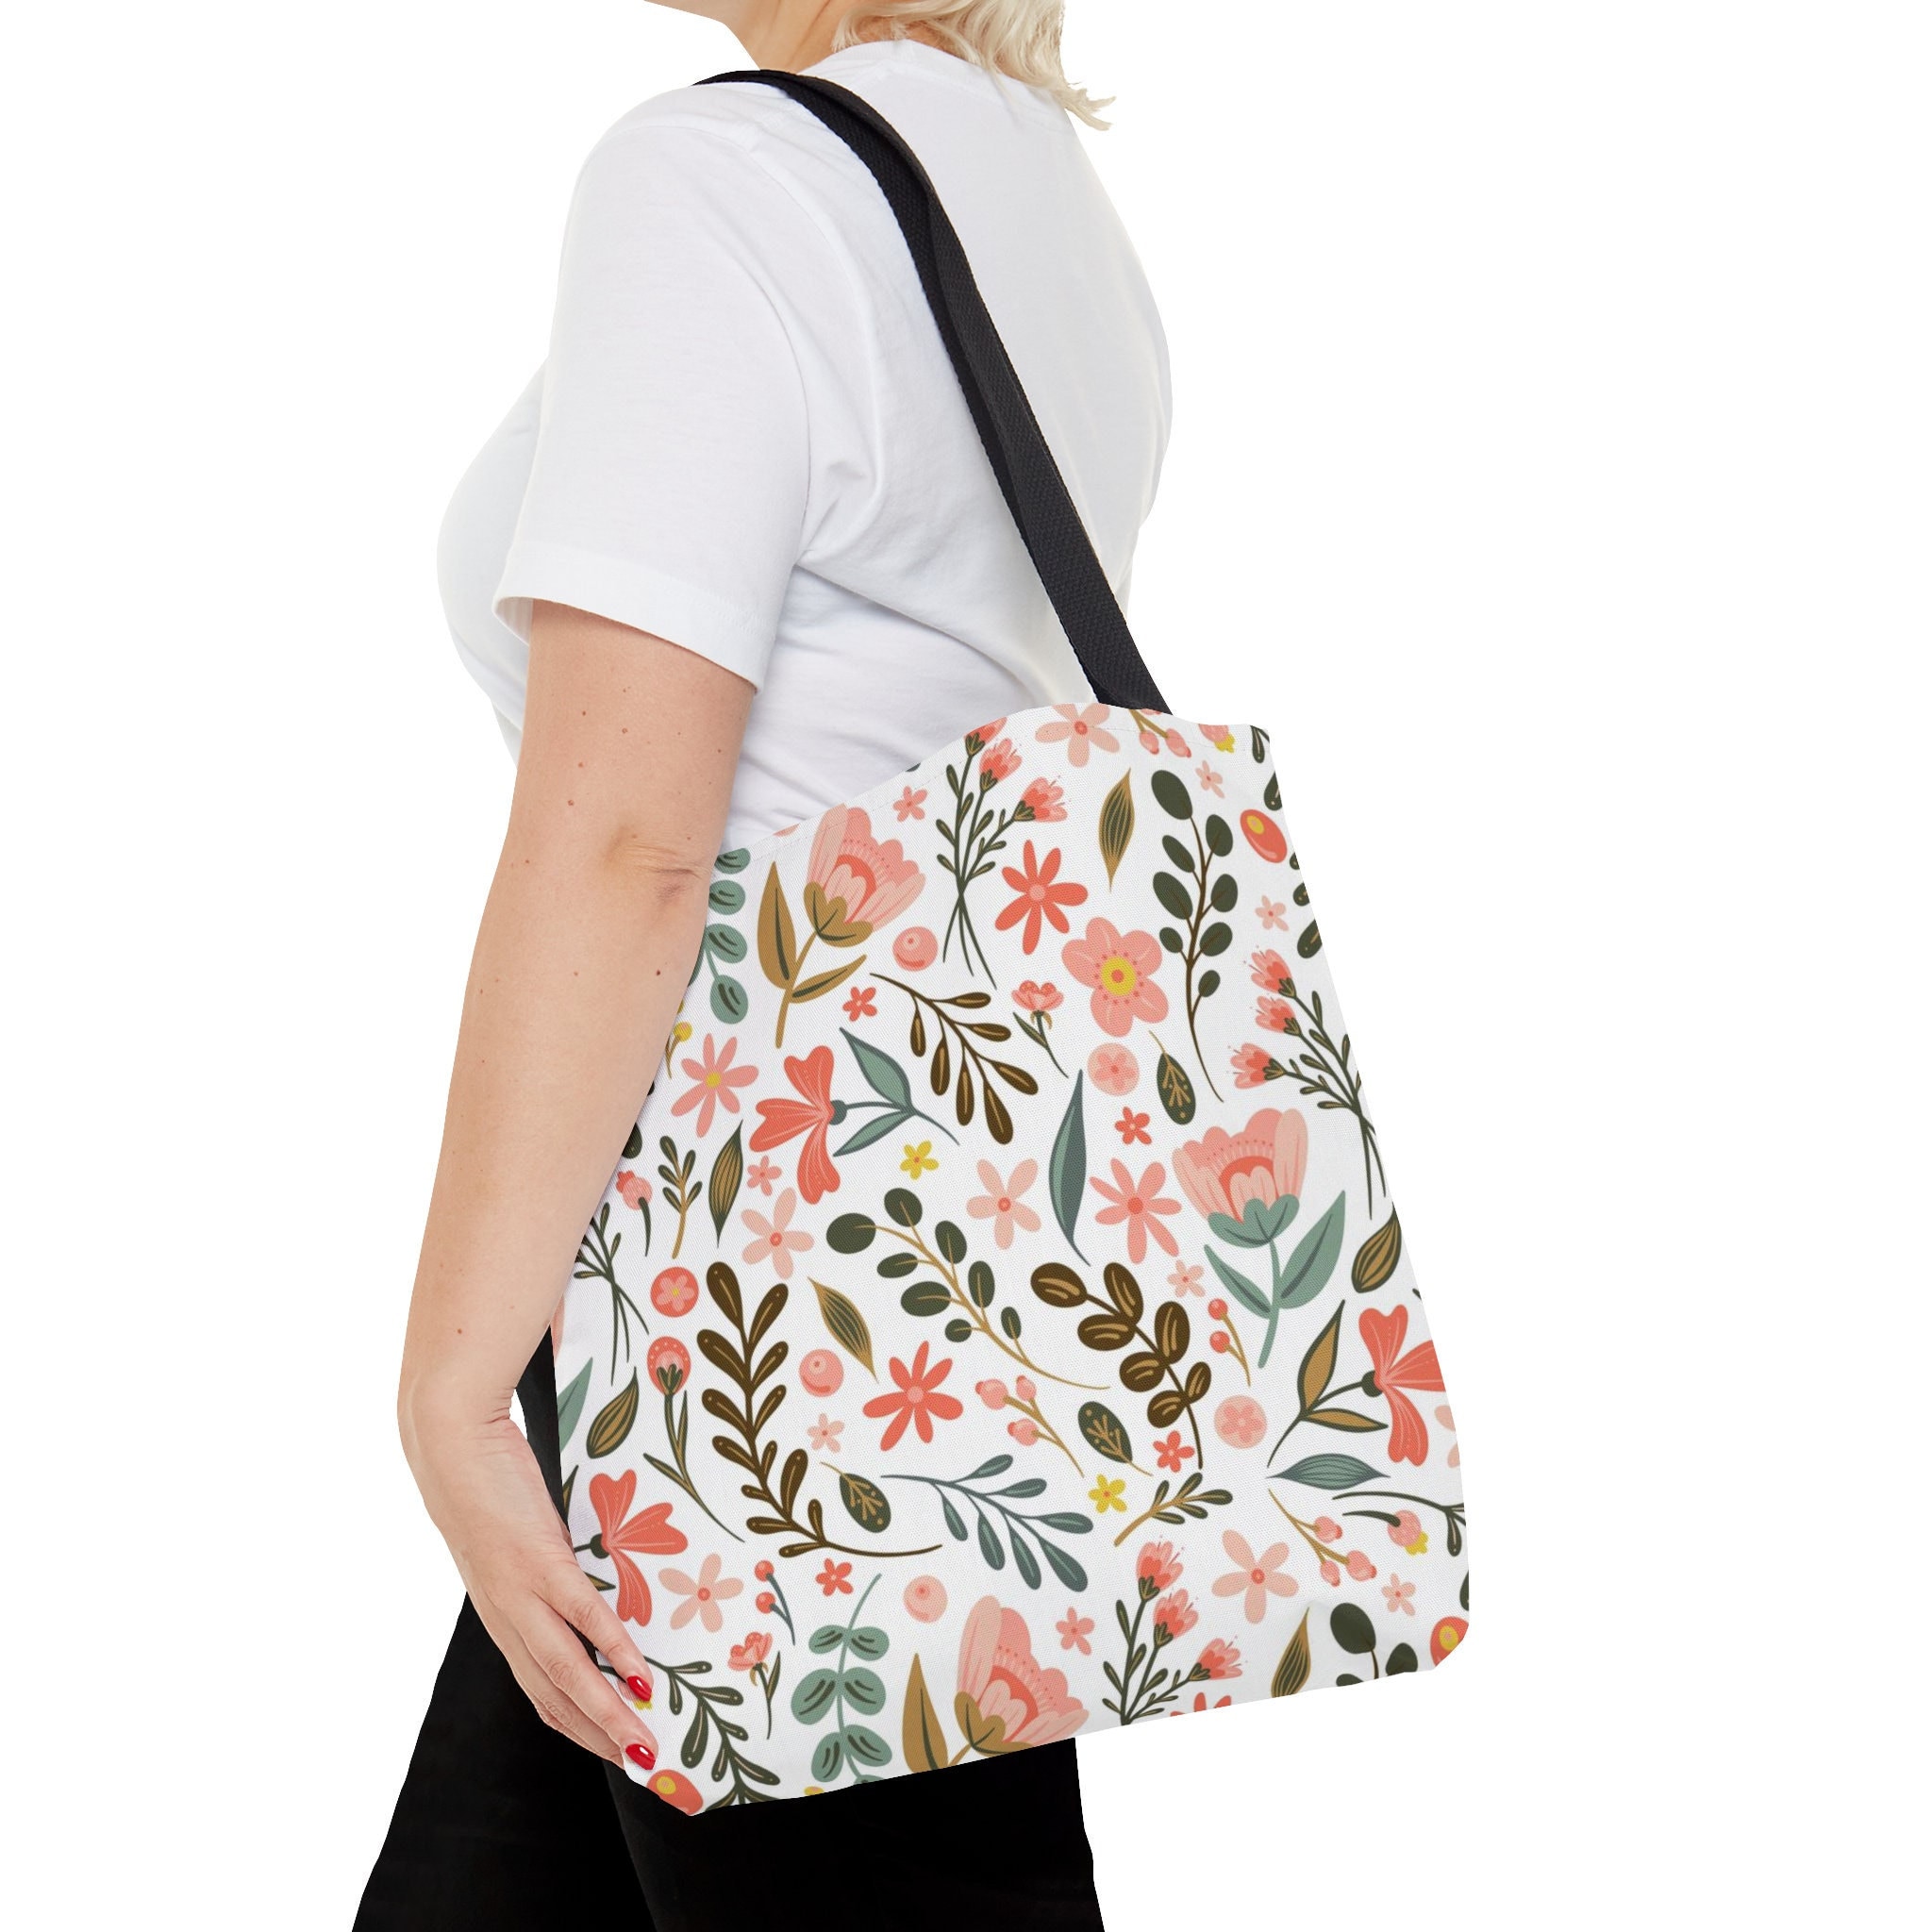 printed cotton canvas tote bag 17in x 13in, Five Below